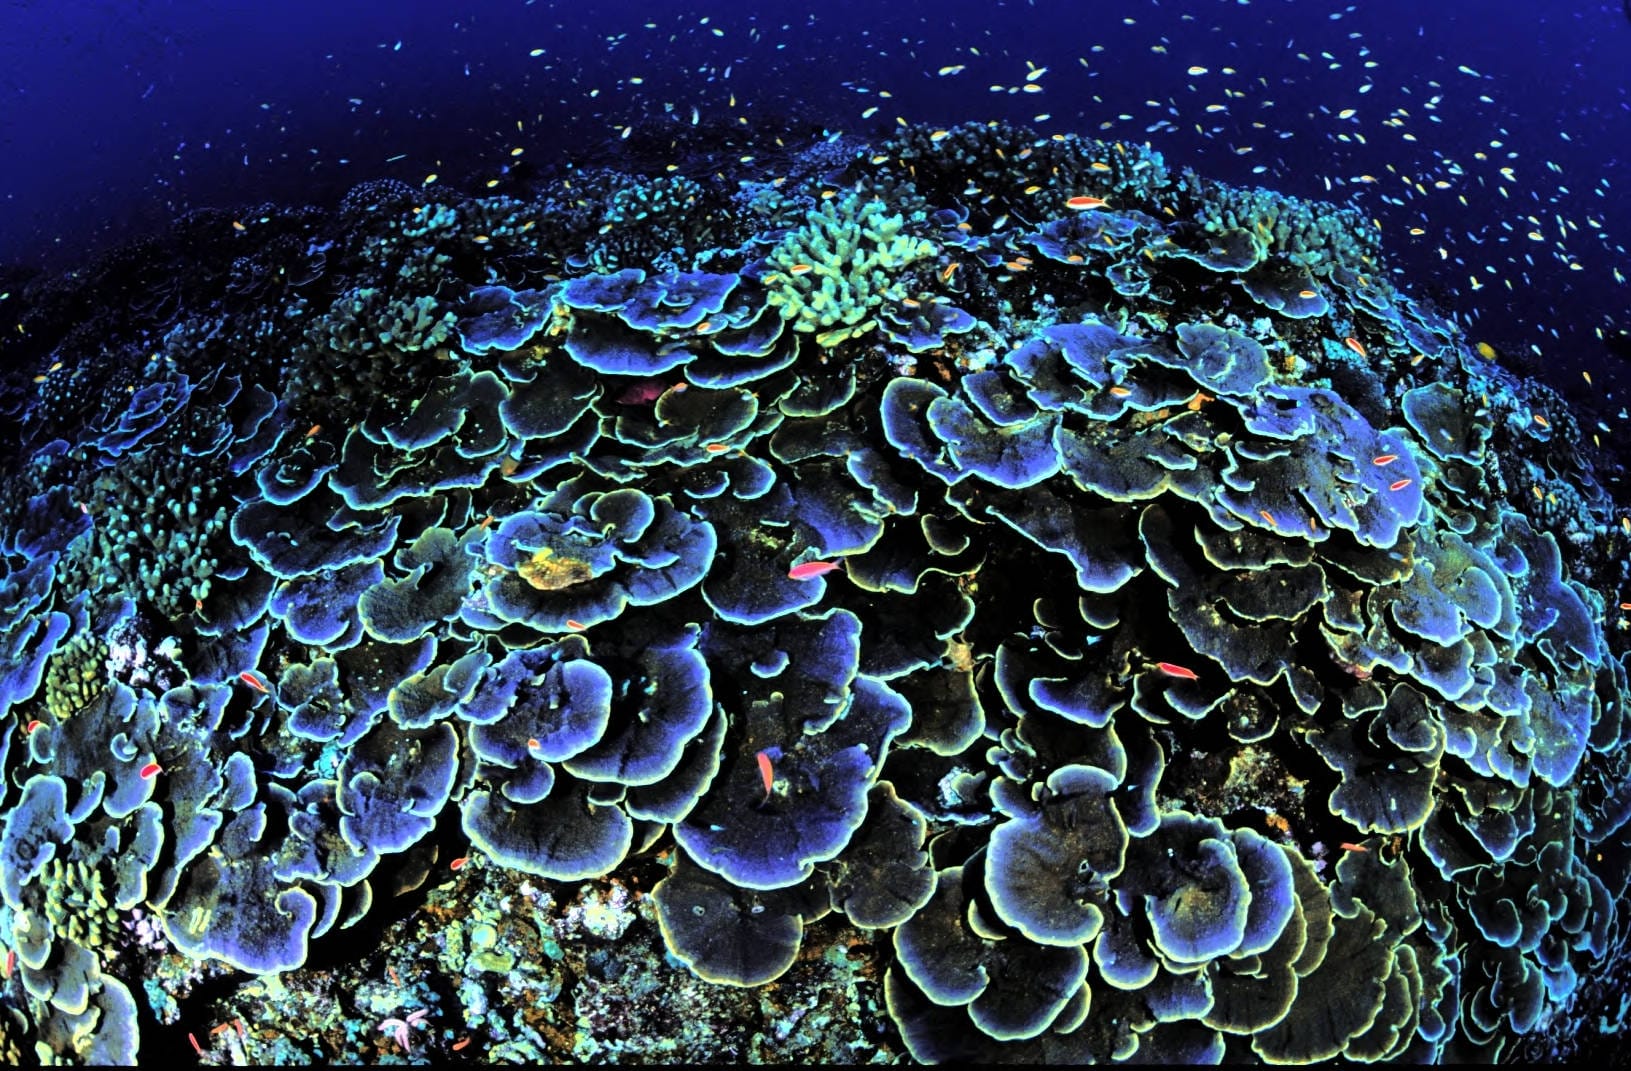 What Do Coral Reefs Have To Do With Dairy Cows?